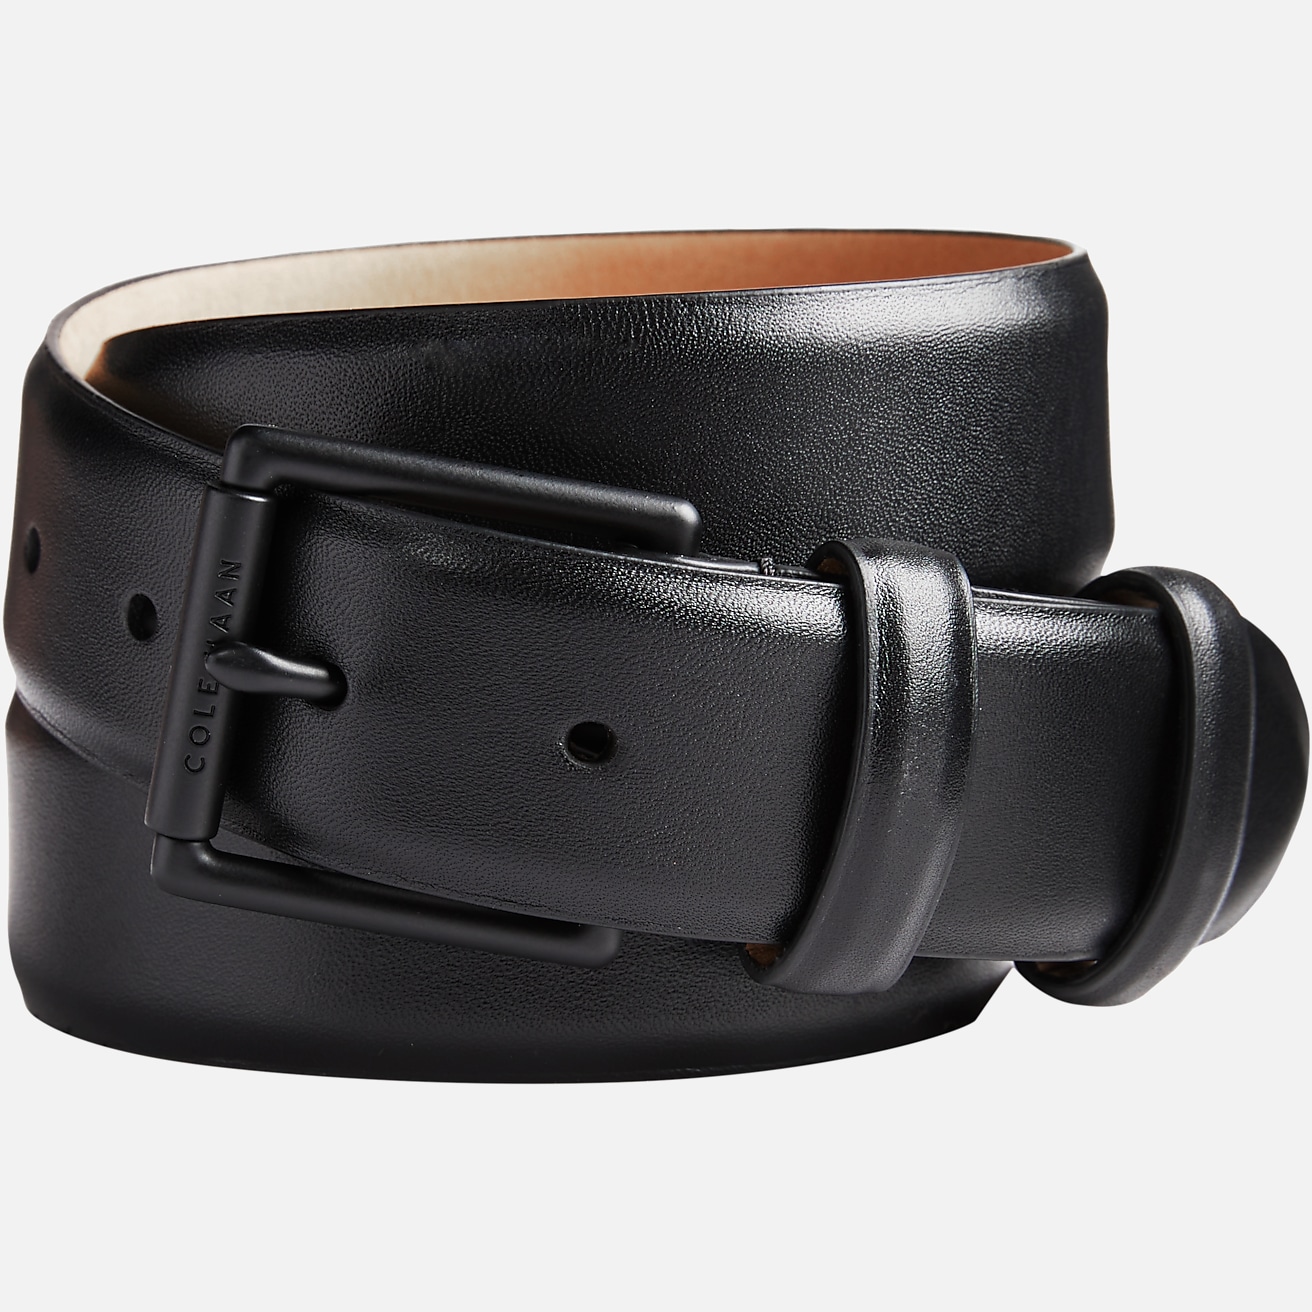 Cole Haan Leather Belt, All Sale